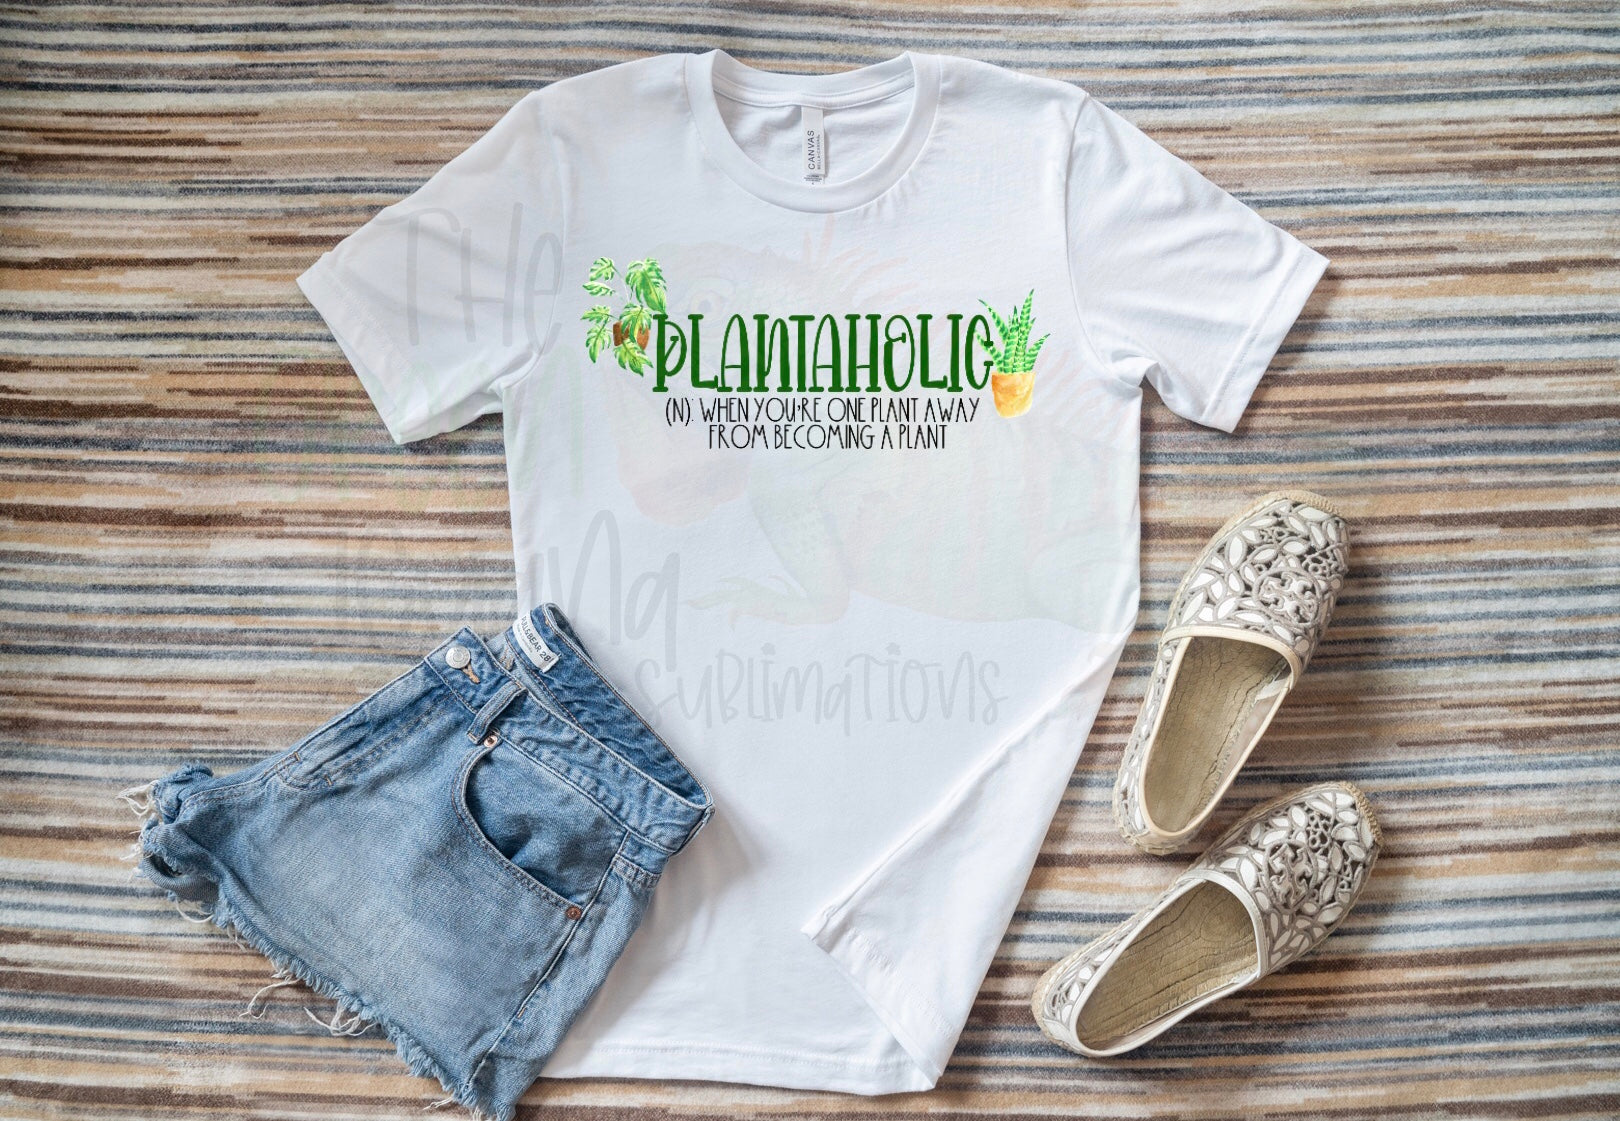 Plantaholic. When you’re one plant away from becoming a plant DTF transfer